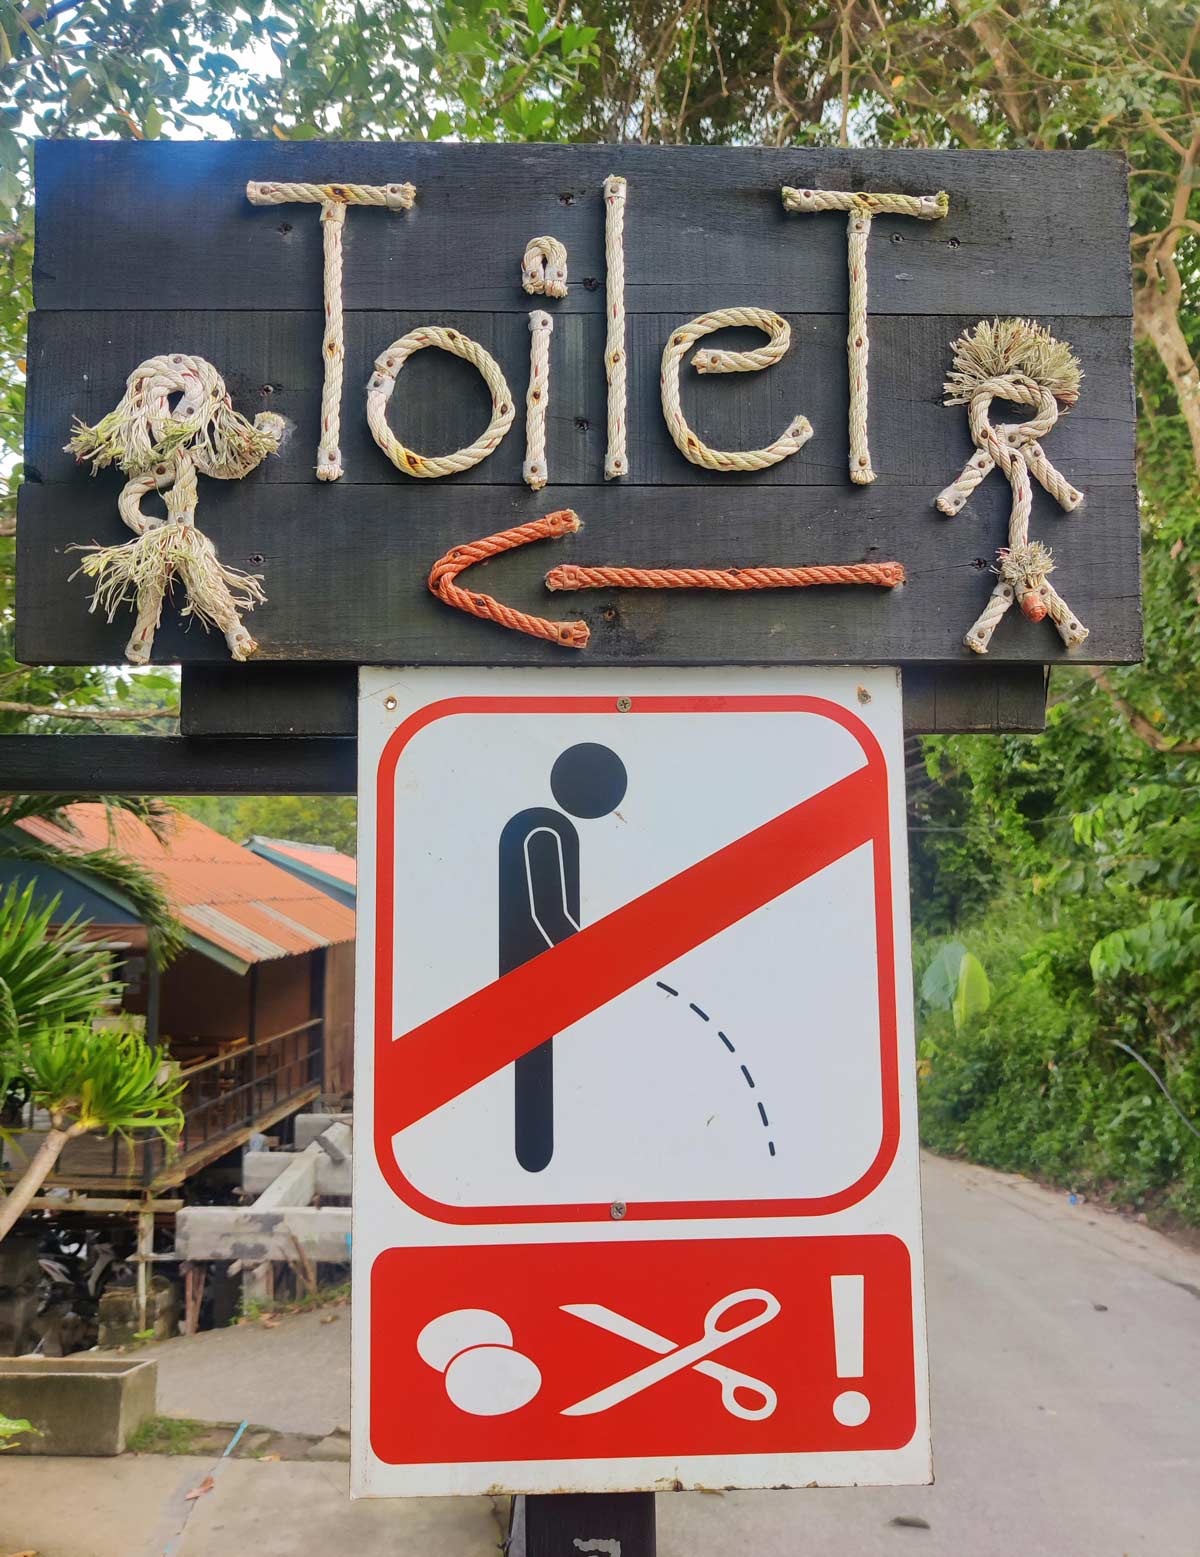 Found this road sign in the wild